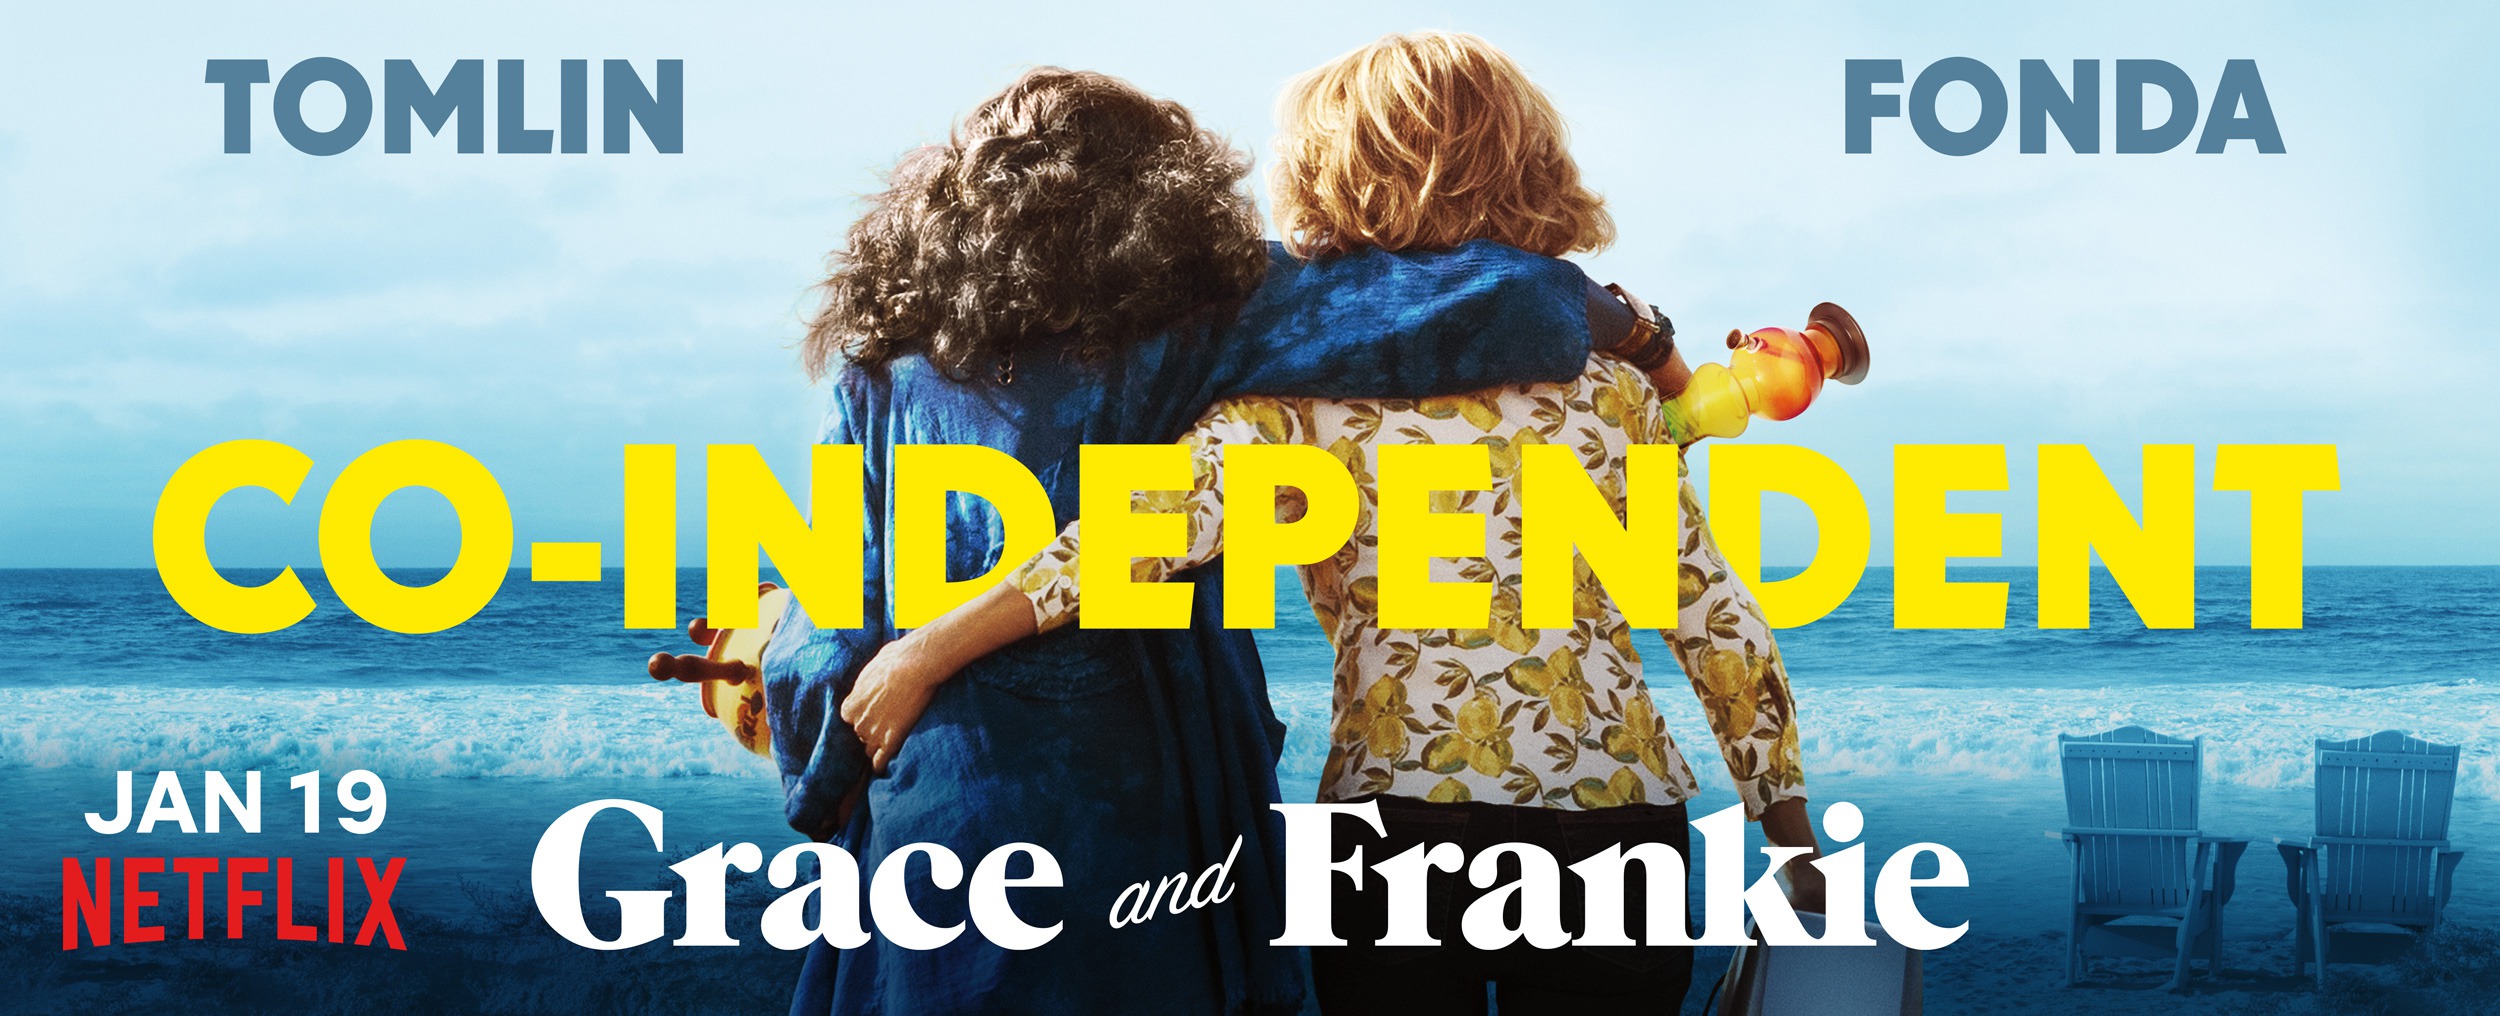 Mega Sized TV Poster Image for Grace and Frankie (#12 of 16)